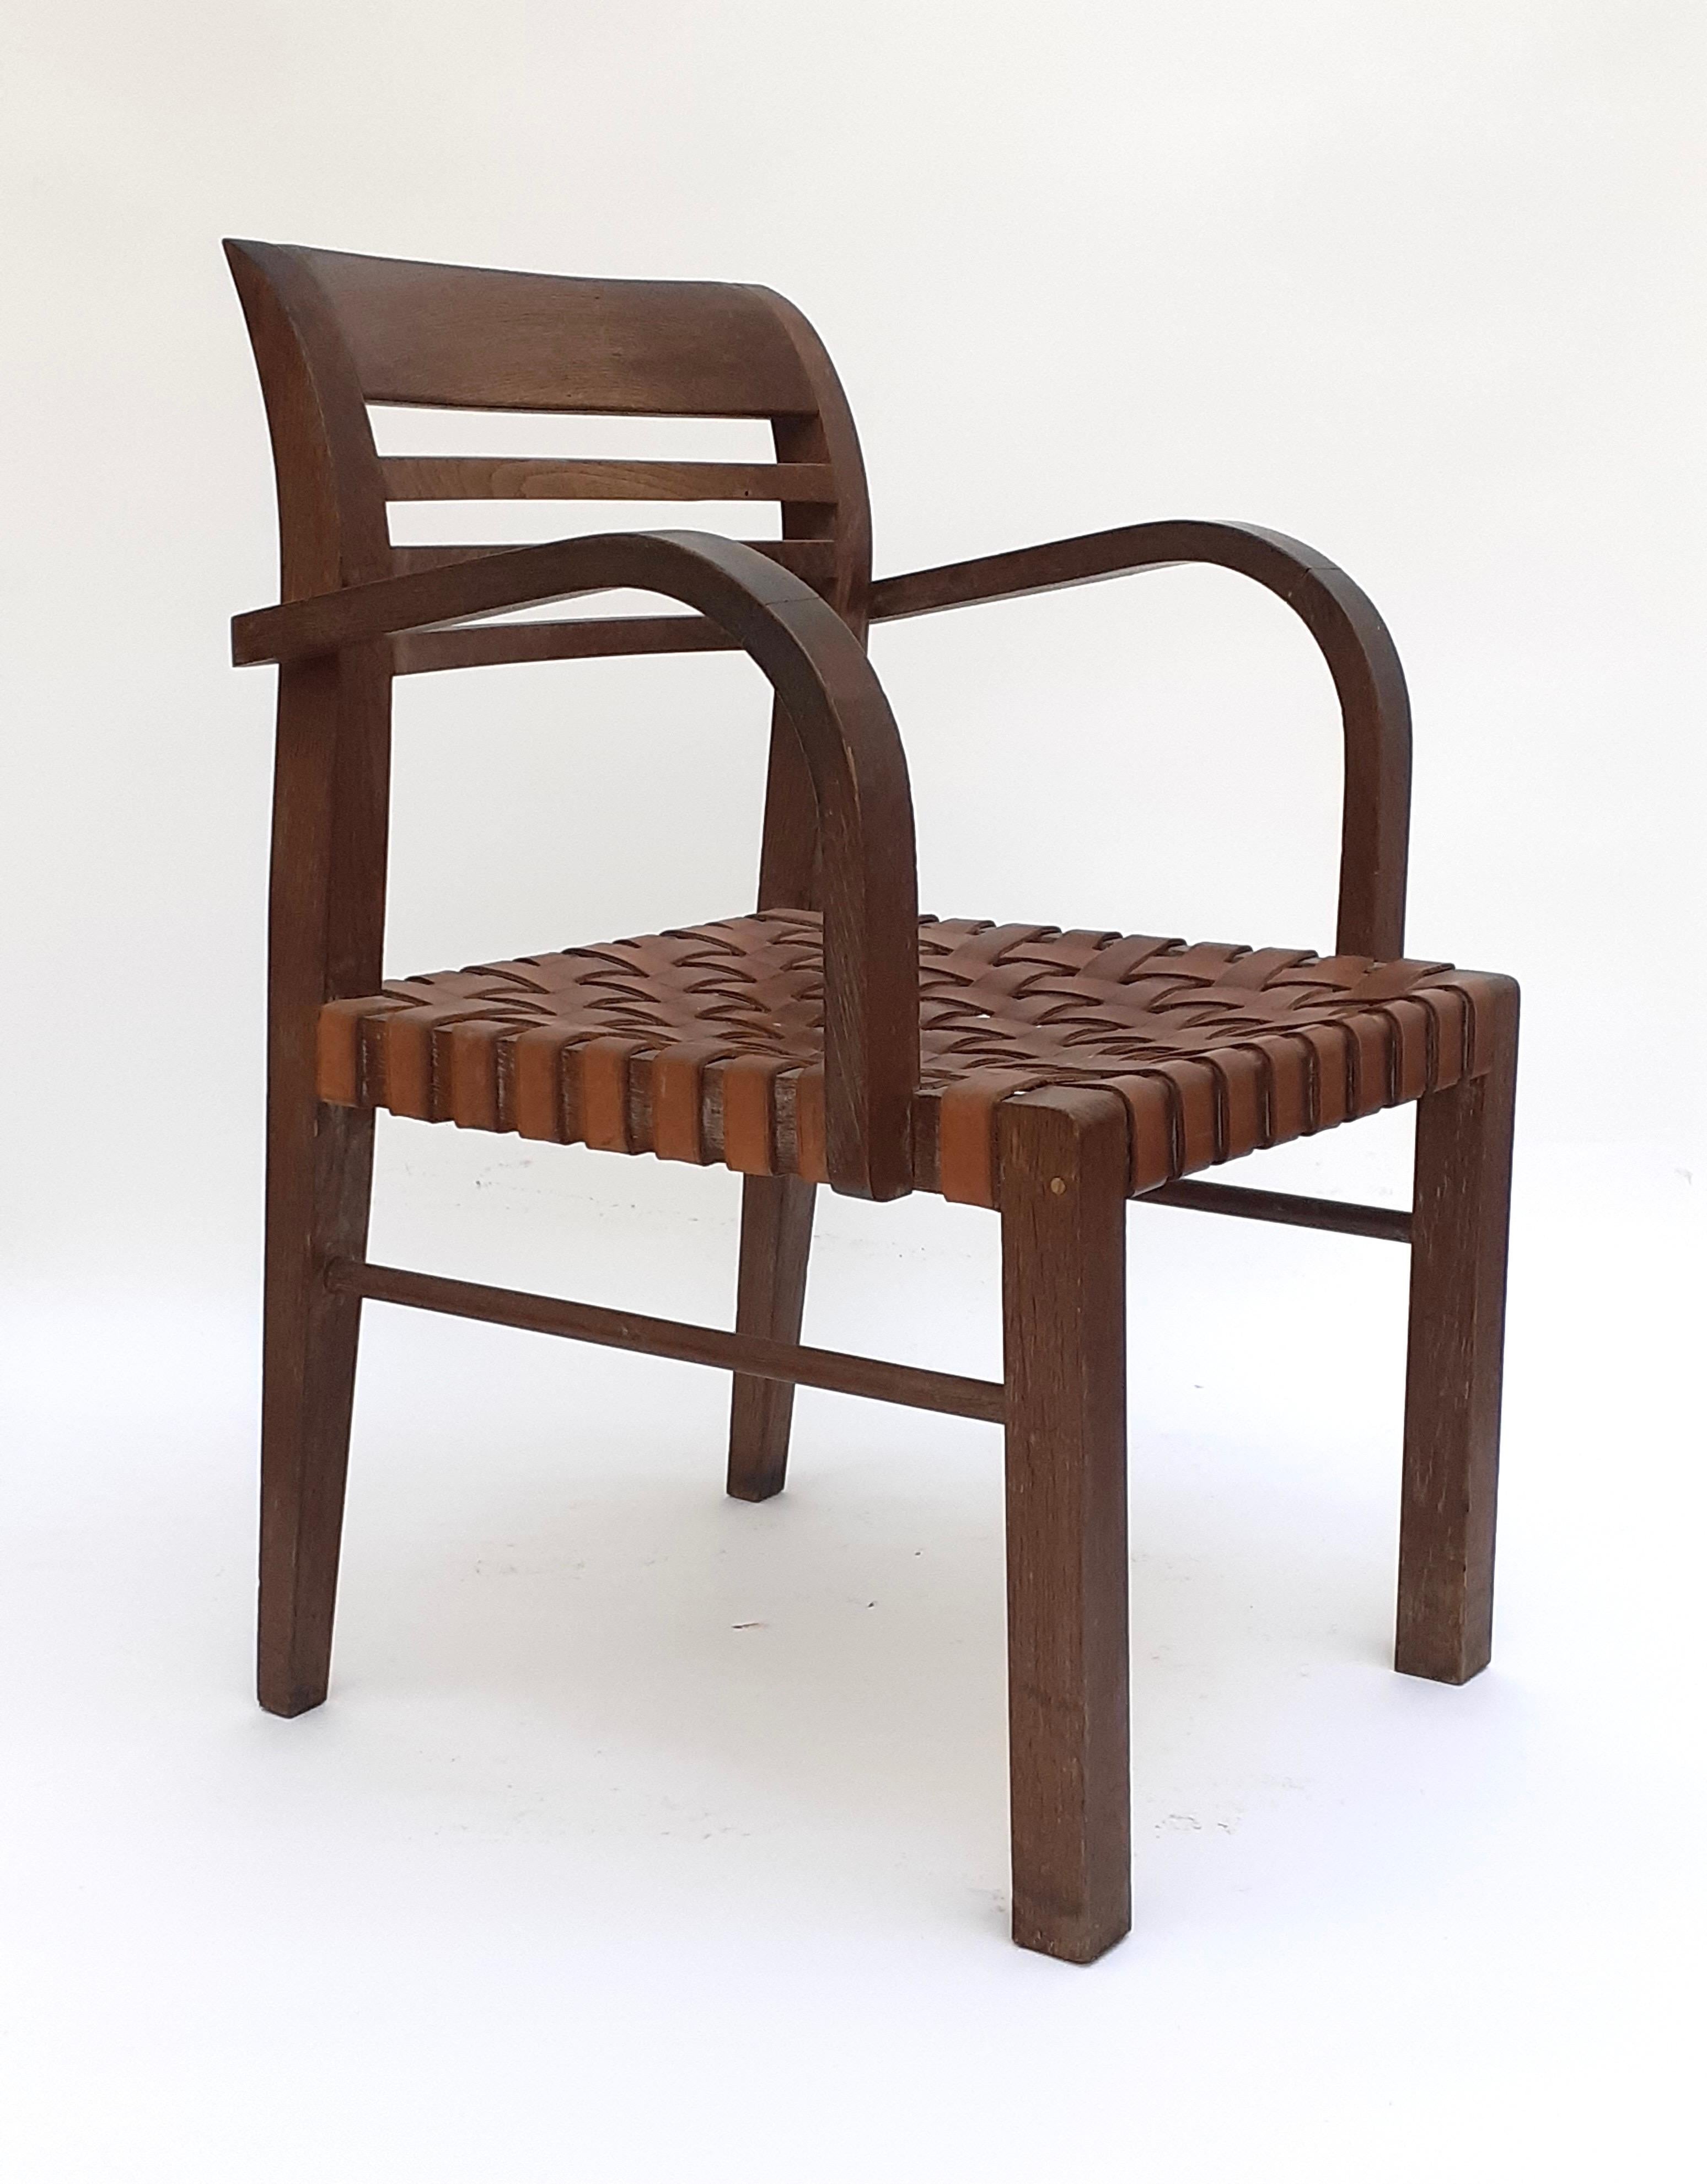 Armchair in Oak and Leather by René Gabriel, Norma, 1936

Oak armchair with an upside down backrest and three bars following the shape of the back, the seat upholstered with criss-crossed leather straps with detached armrests slightly recessed from